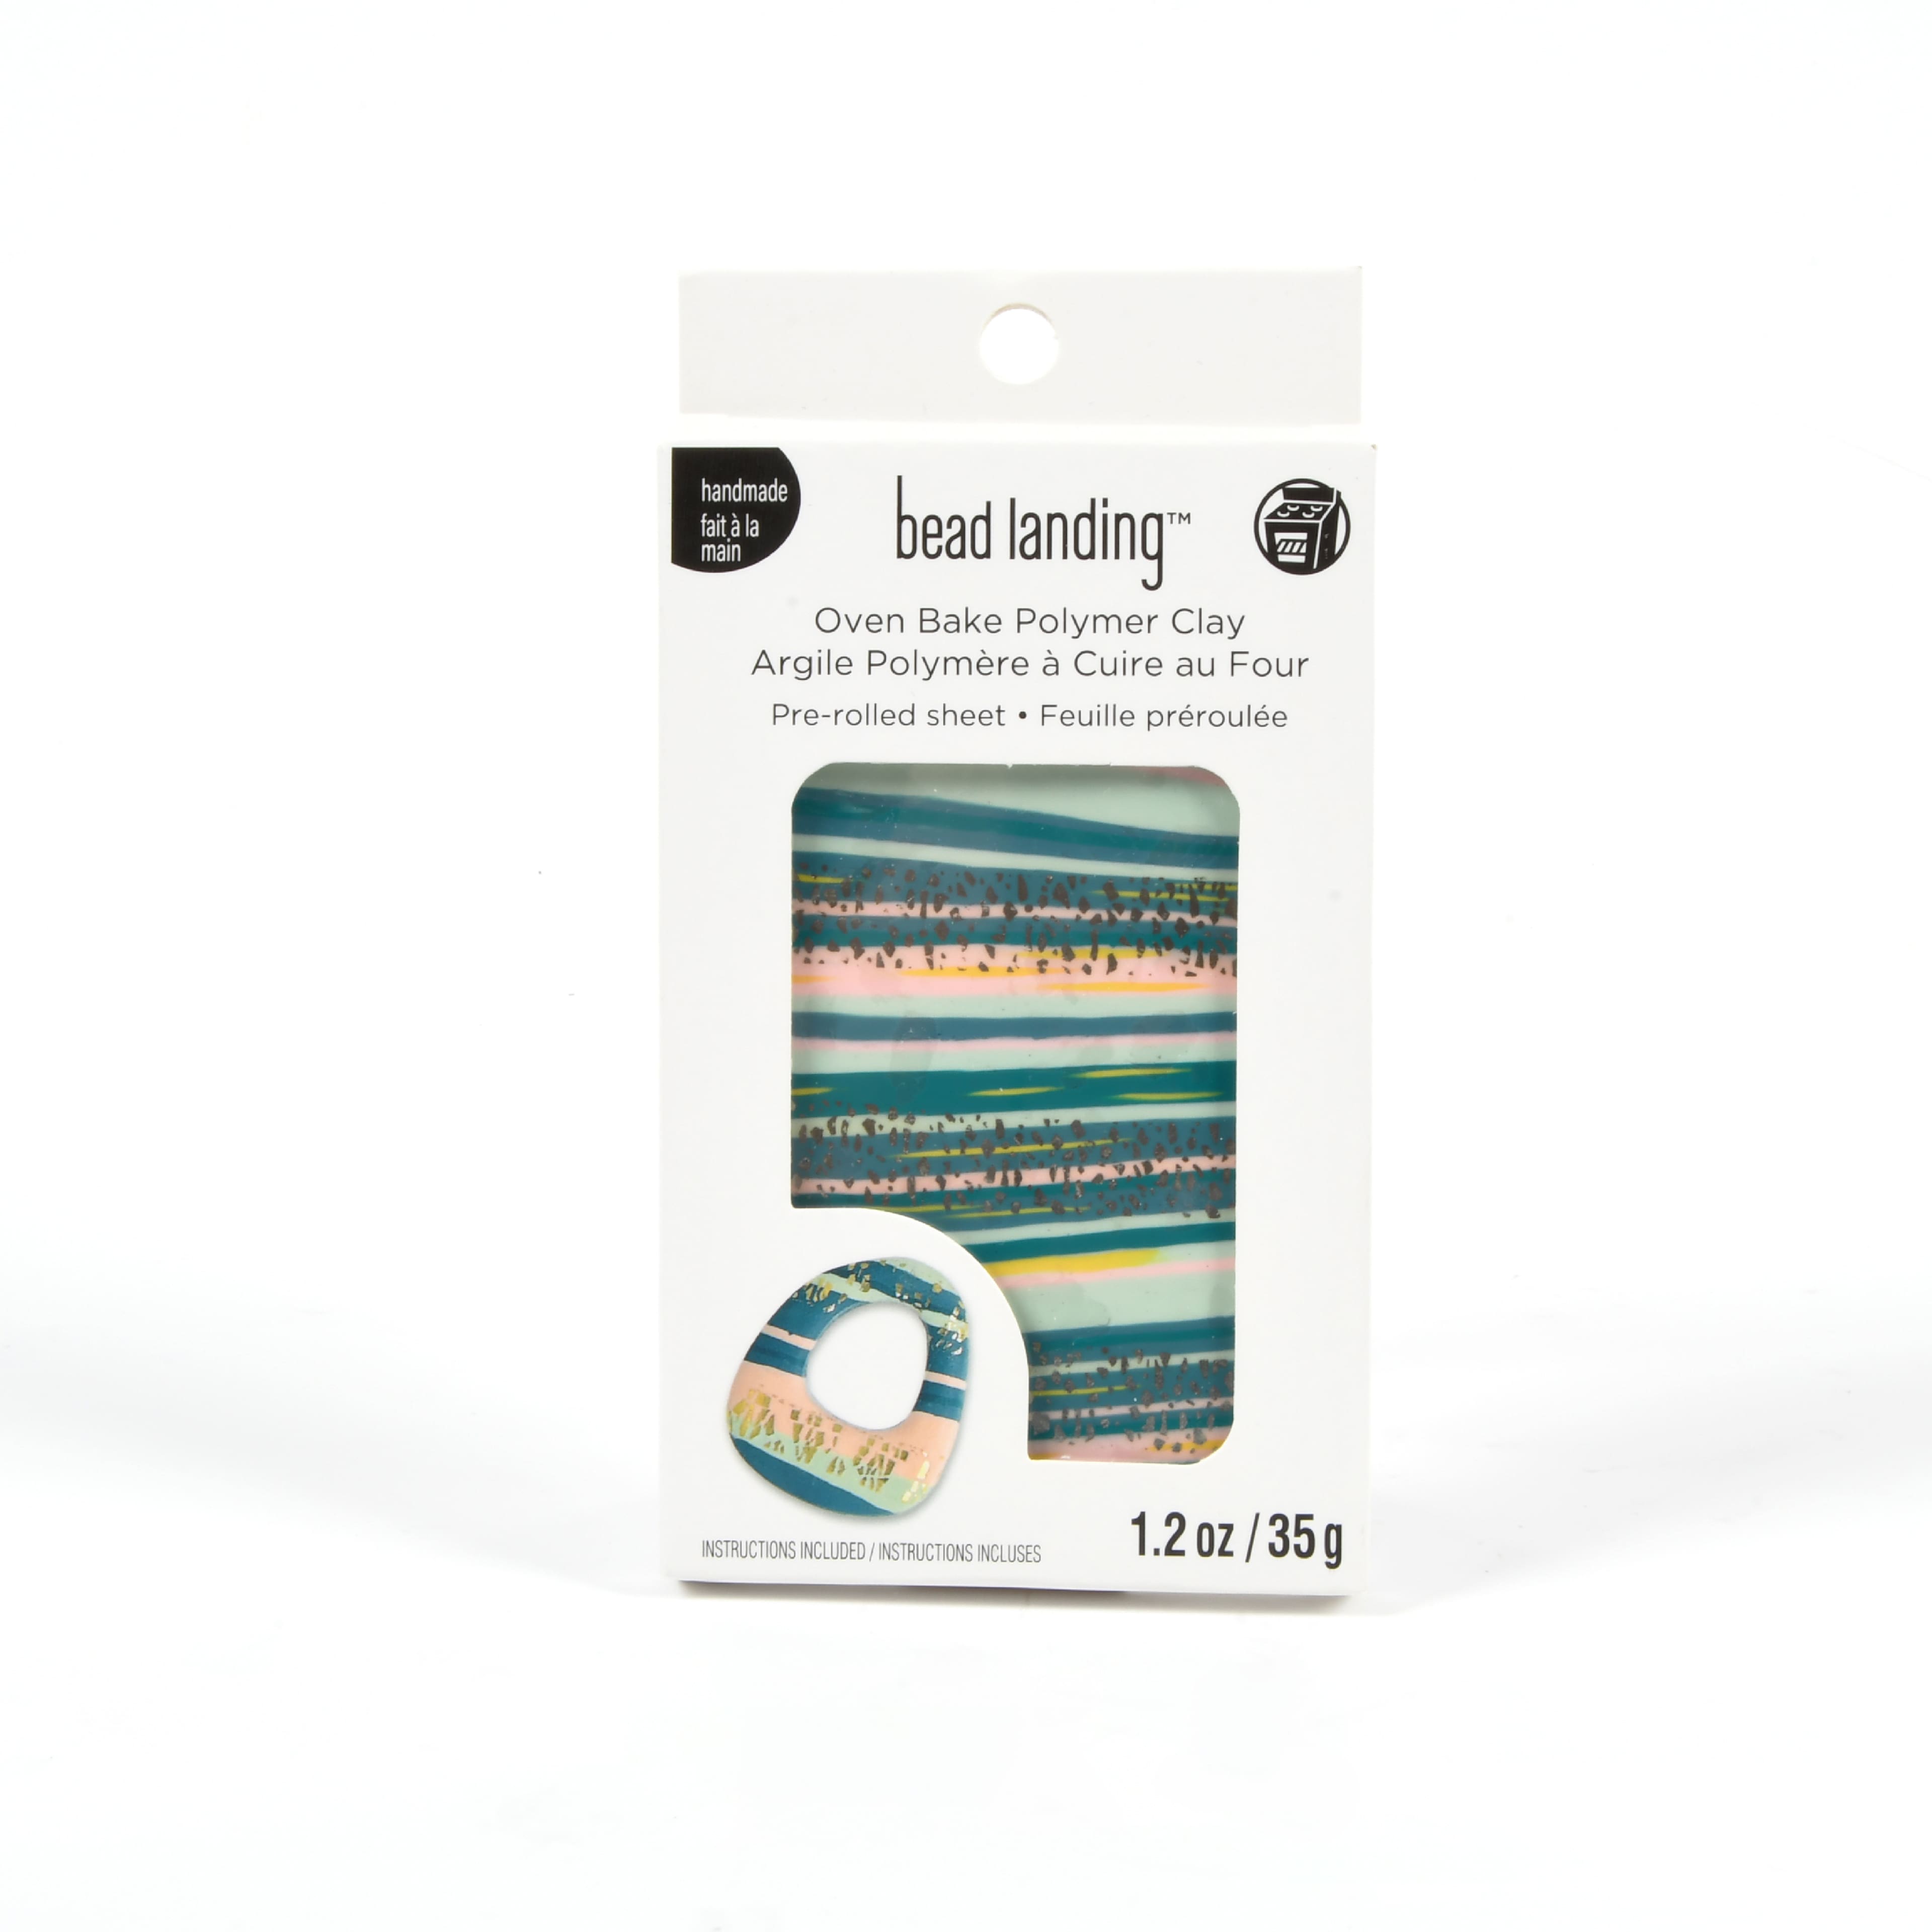 Oven Bake Polymer Clay by Bead Landing- Pre-rolled Sheet 1.2 oz. (Set Of 4)